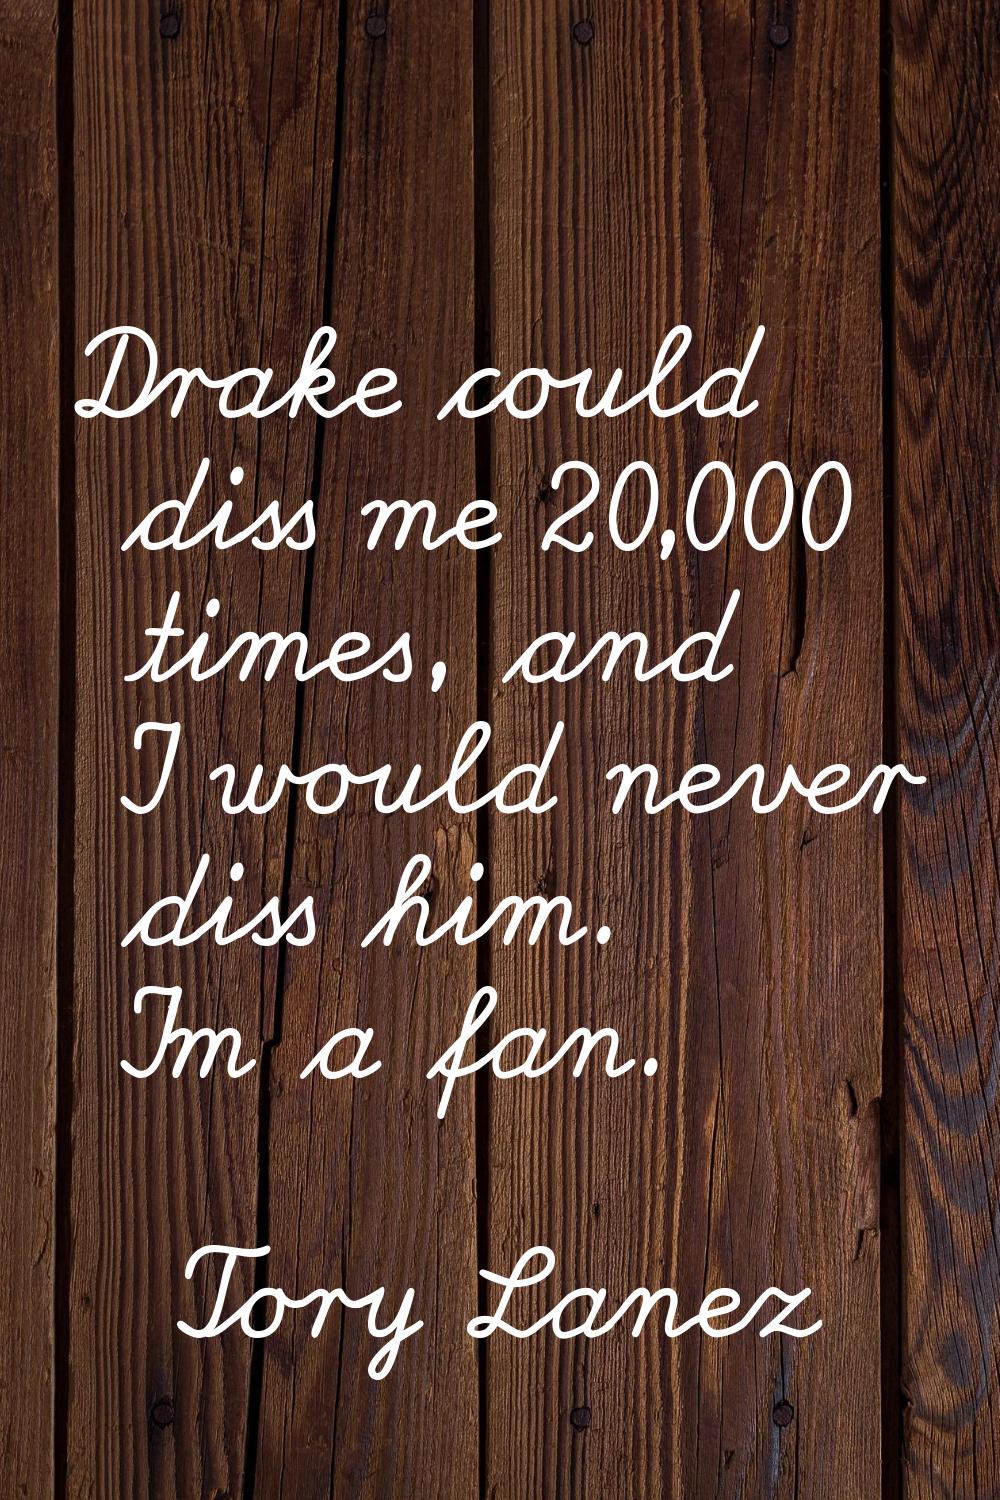 Drake could diss me 20,000 times, and I would never diss him. I'm a fan.